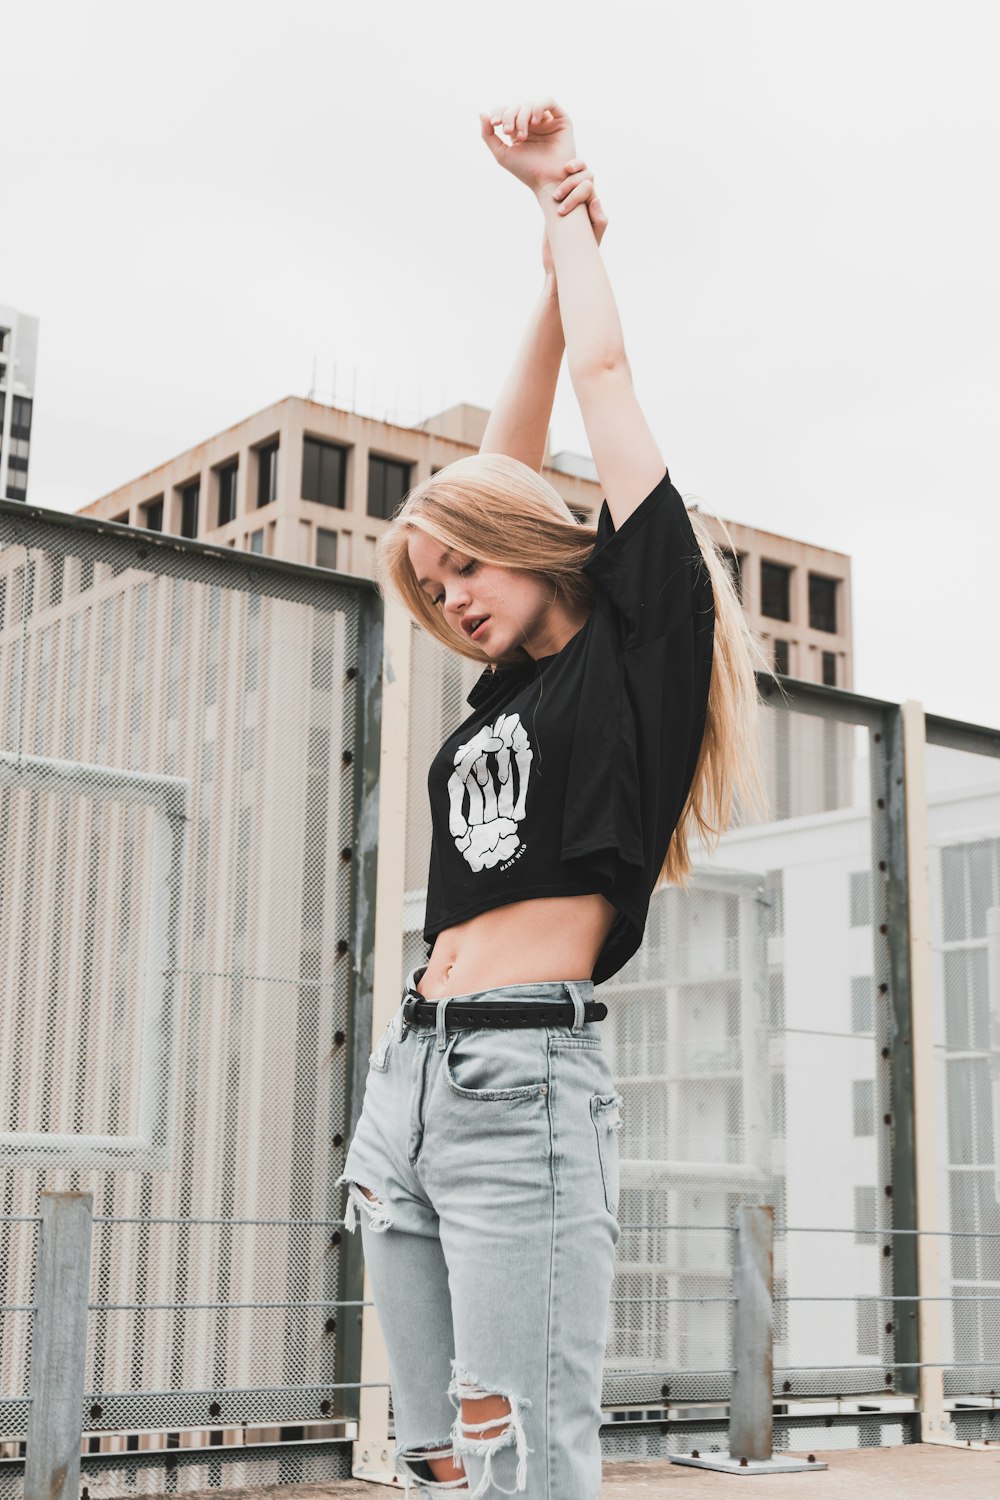 750+ Style Girl Pictures | Download Free Images on Unsplash